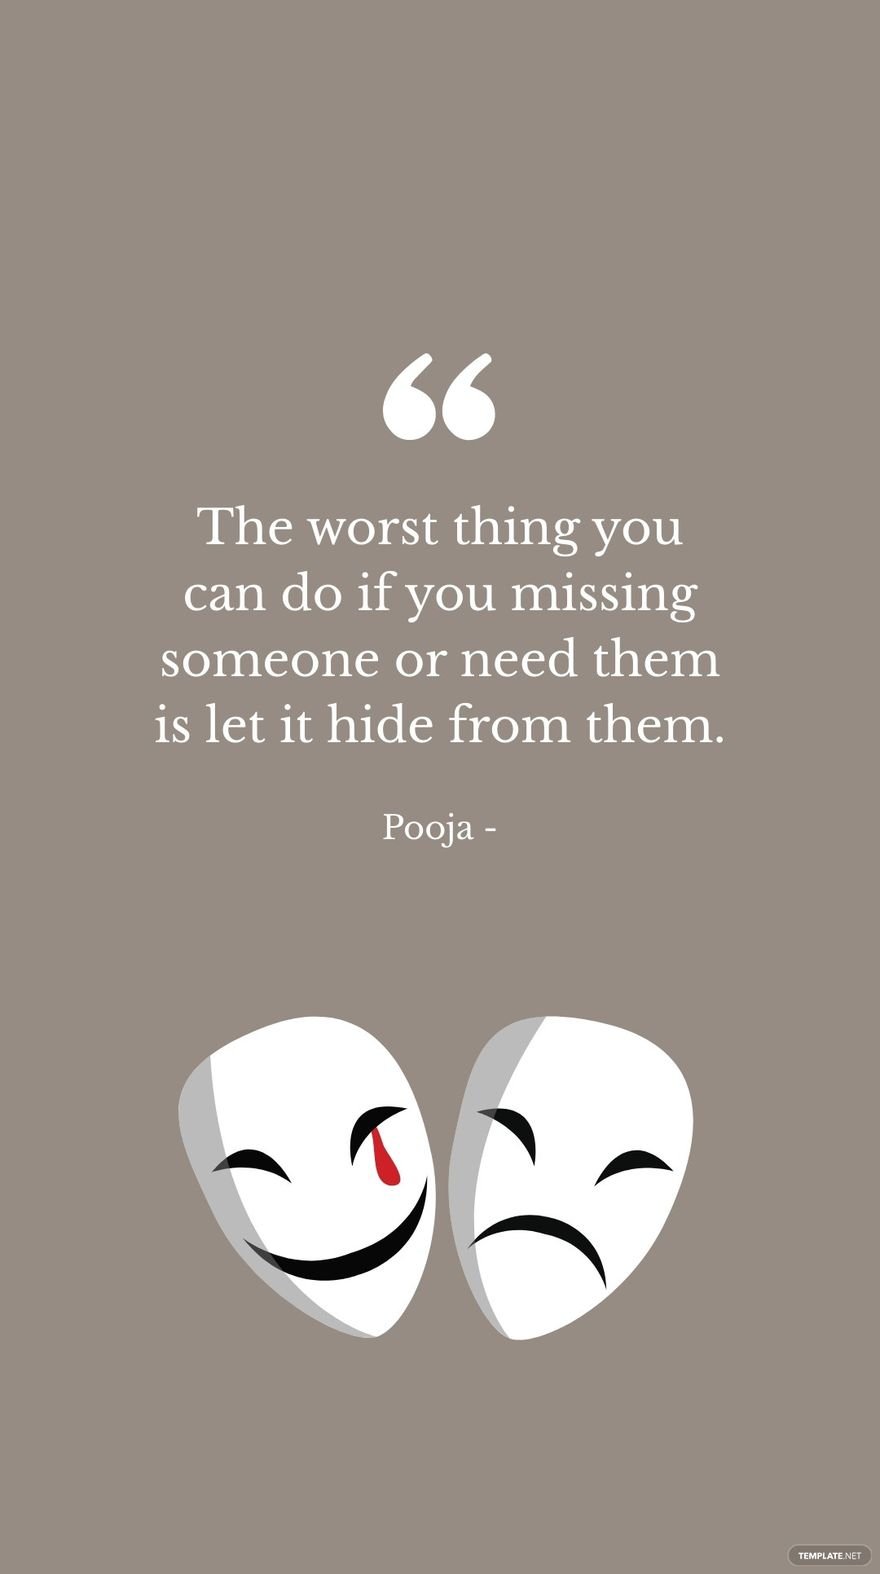 Pooja - The worst thing you can do if you missing someone or need them is let it hide from them.